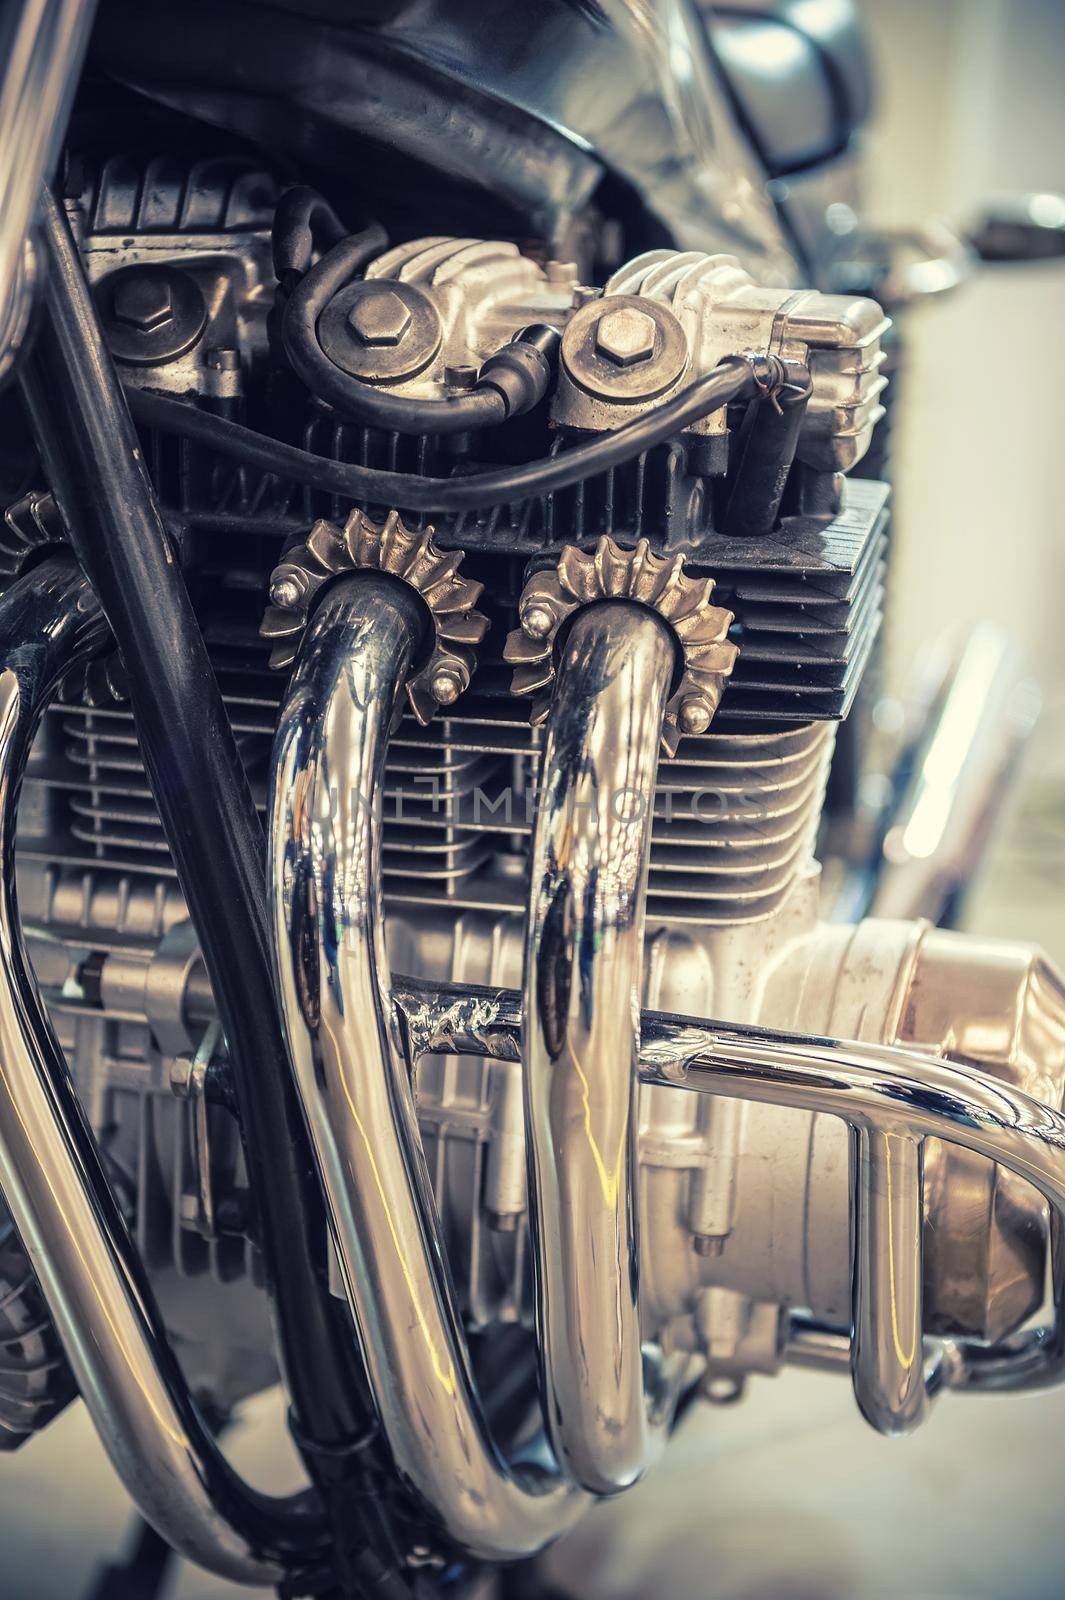 Aged motorcycle engine detail by cla78